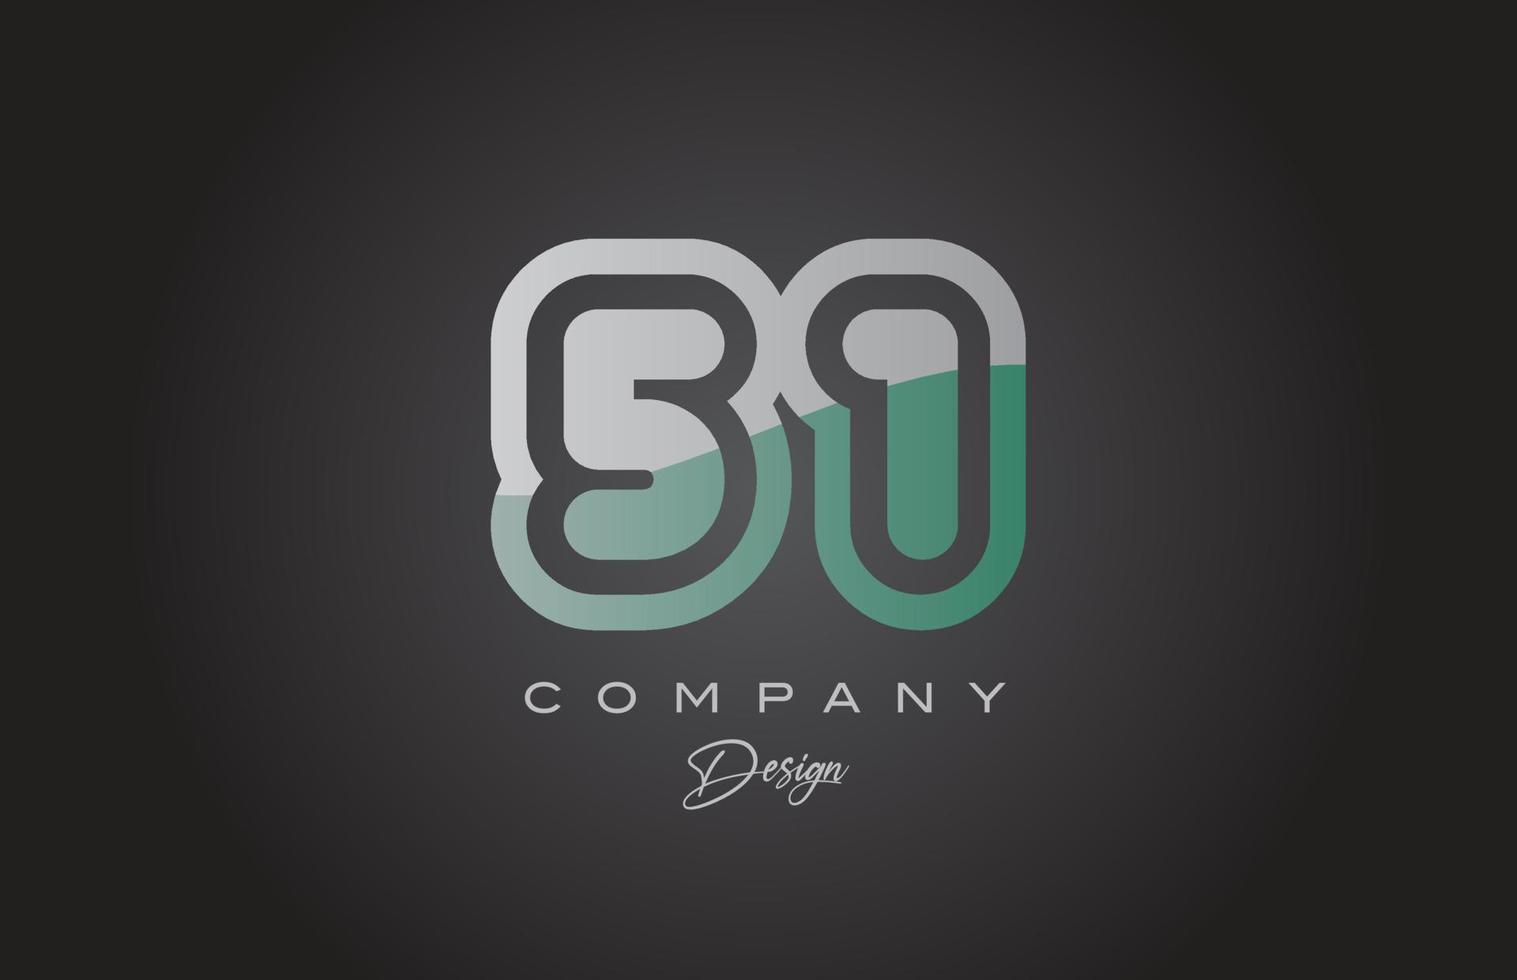 51 green grey number logo icon design. Creative template for company and business vector